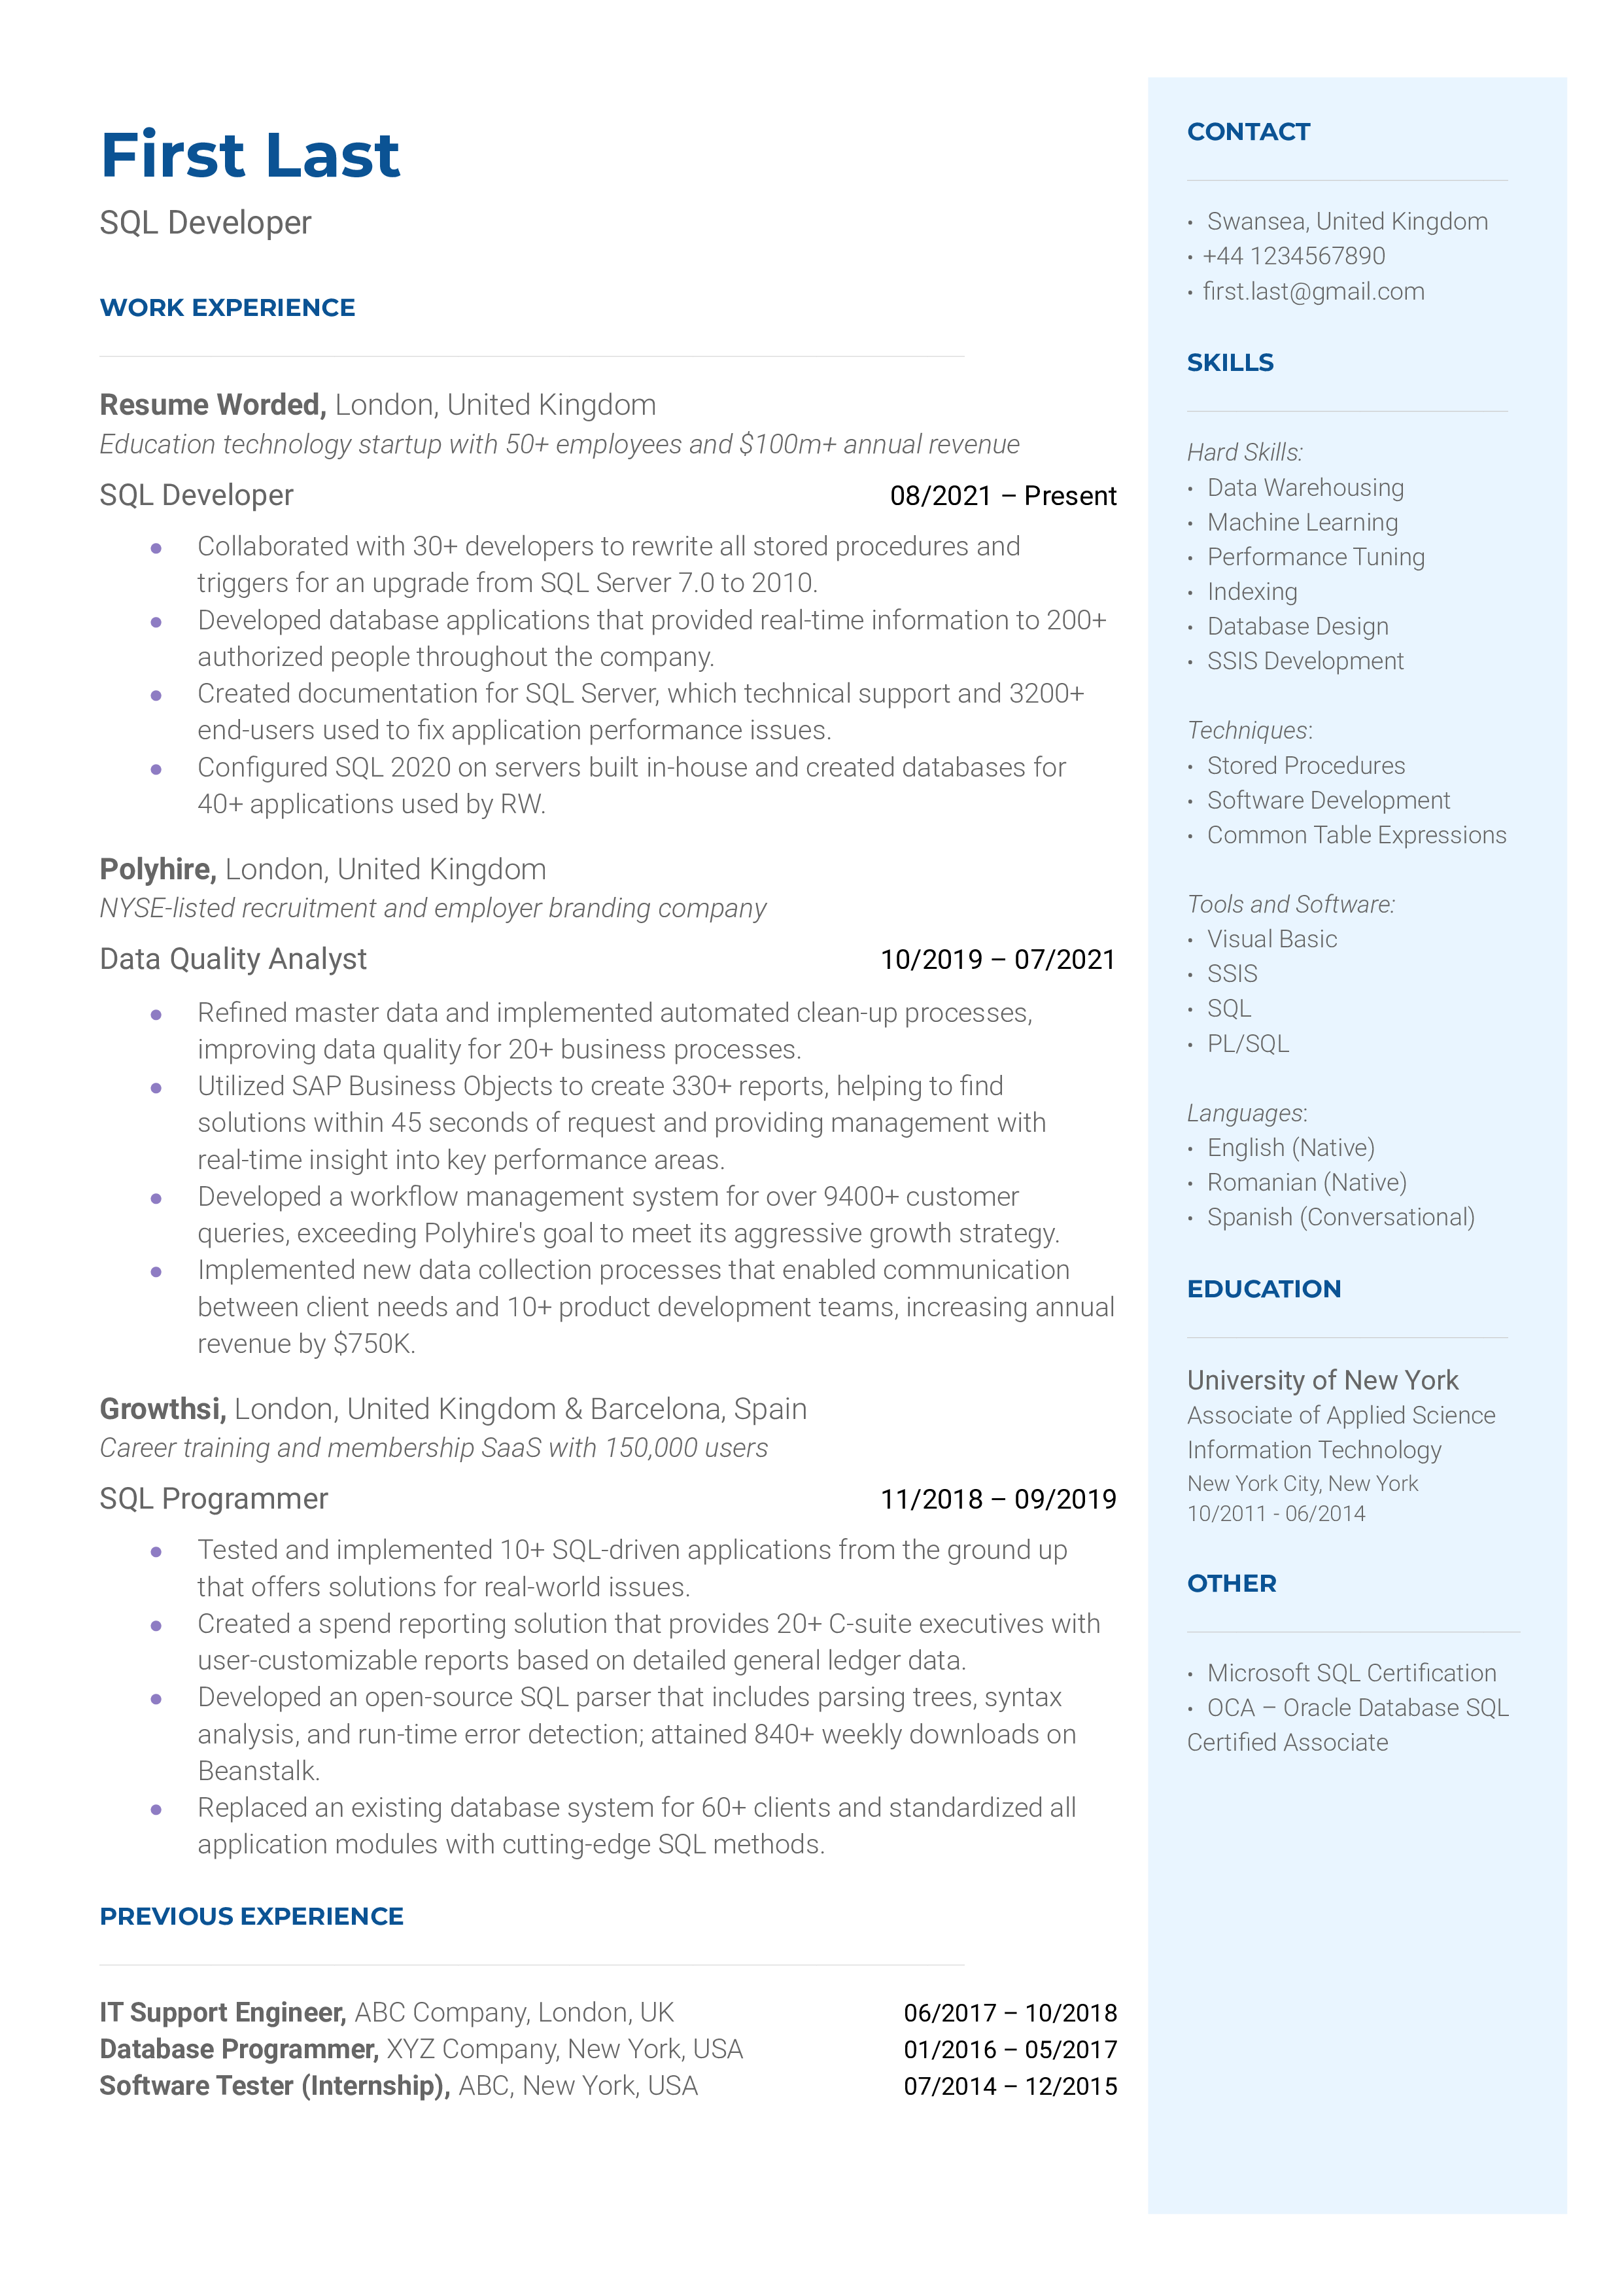 A resume for a SQL developer with a bachelor's degree in computer science and experience as a junior SQL developer.